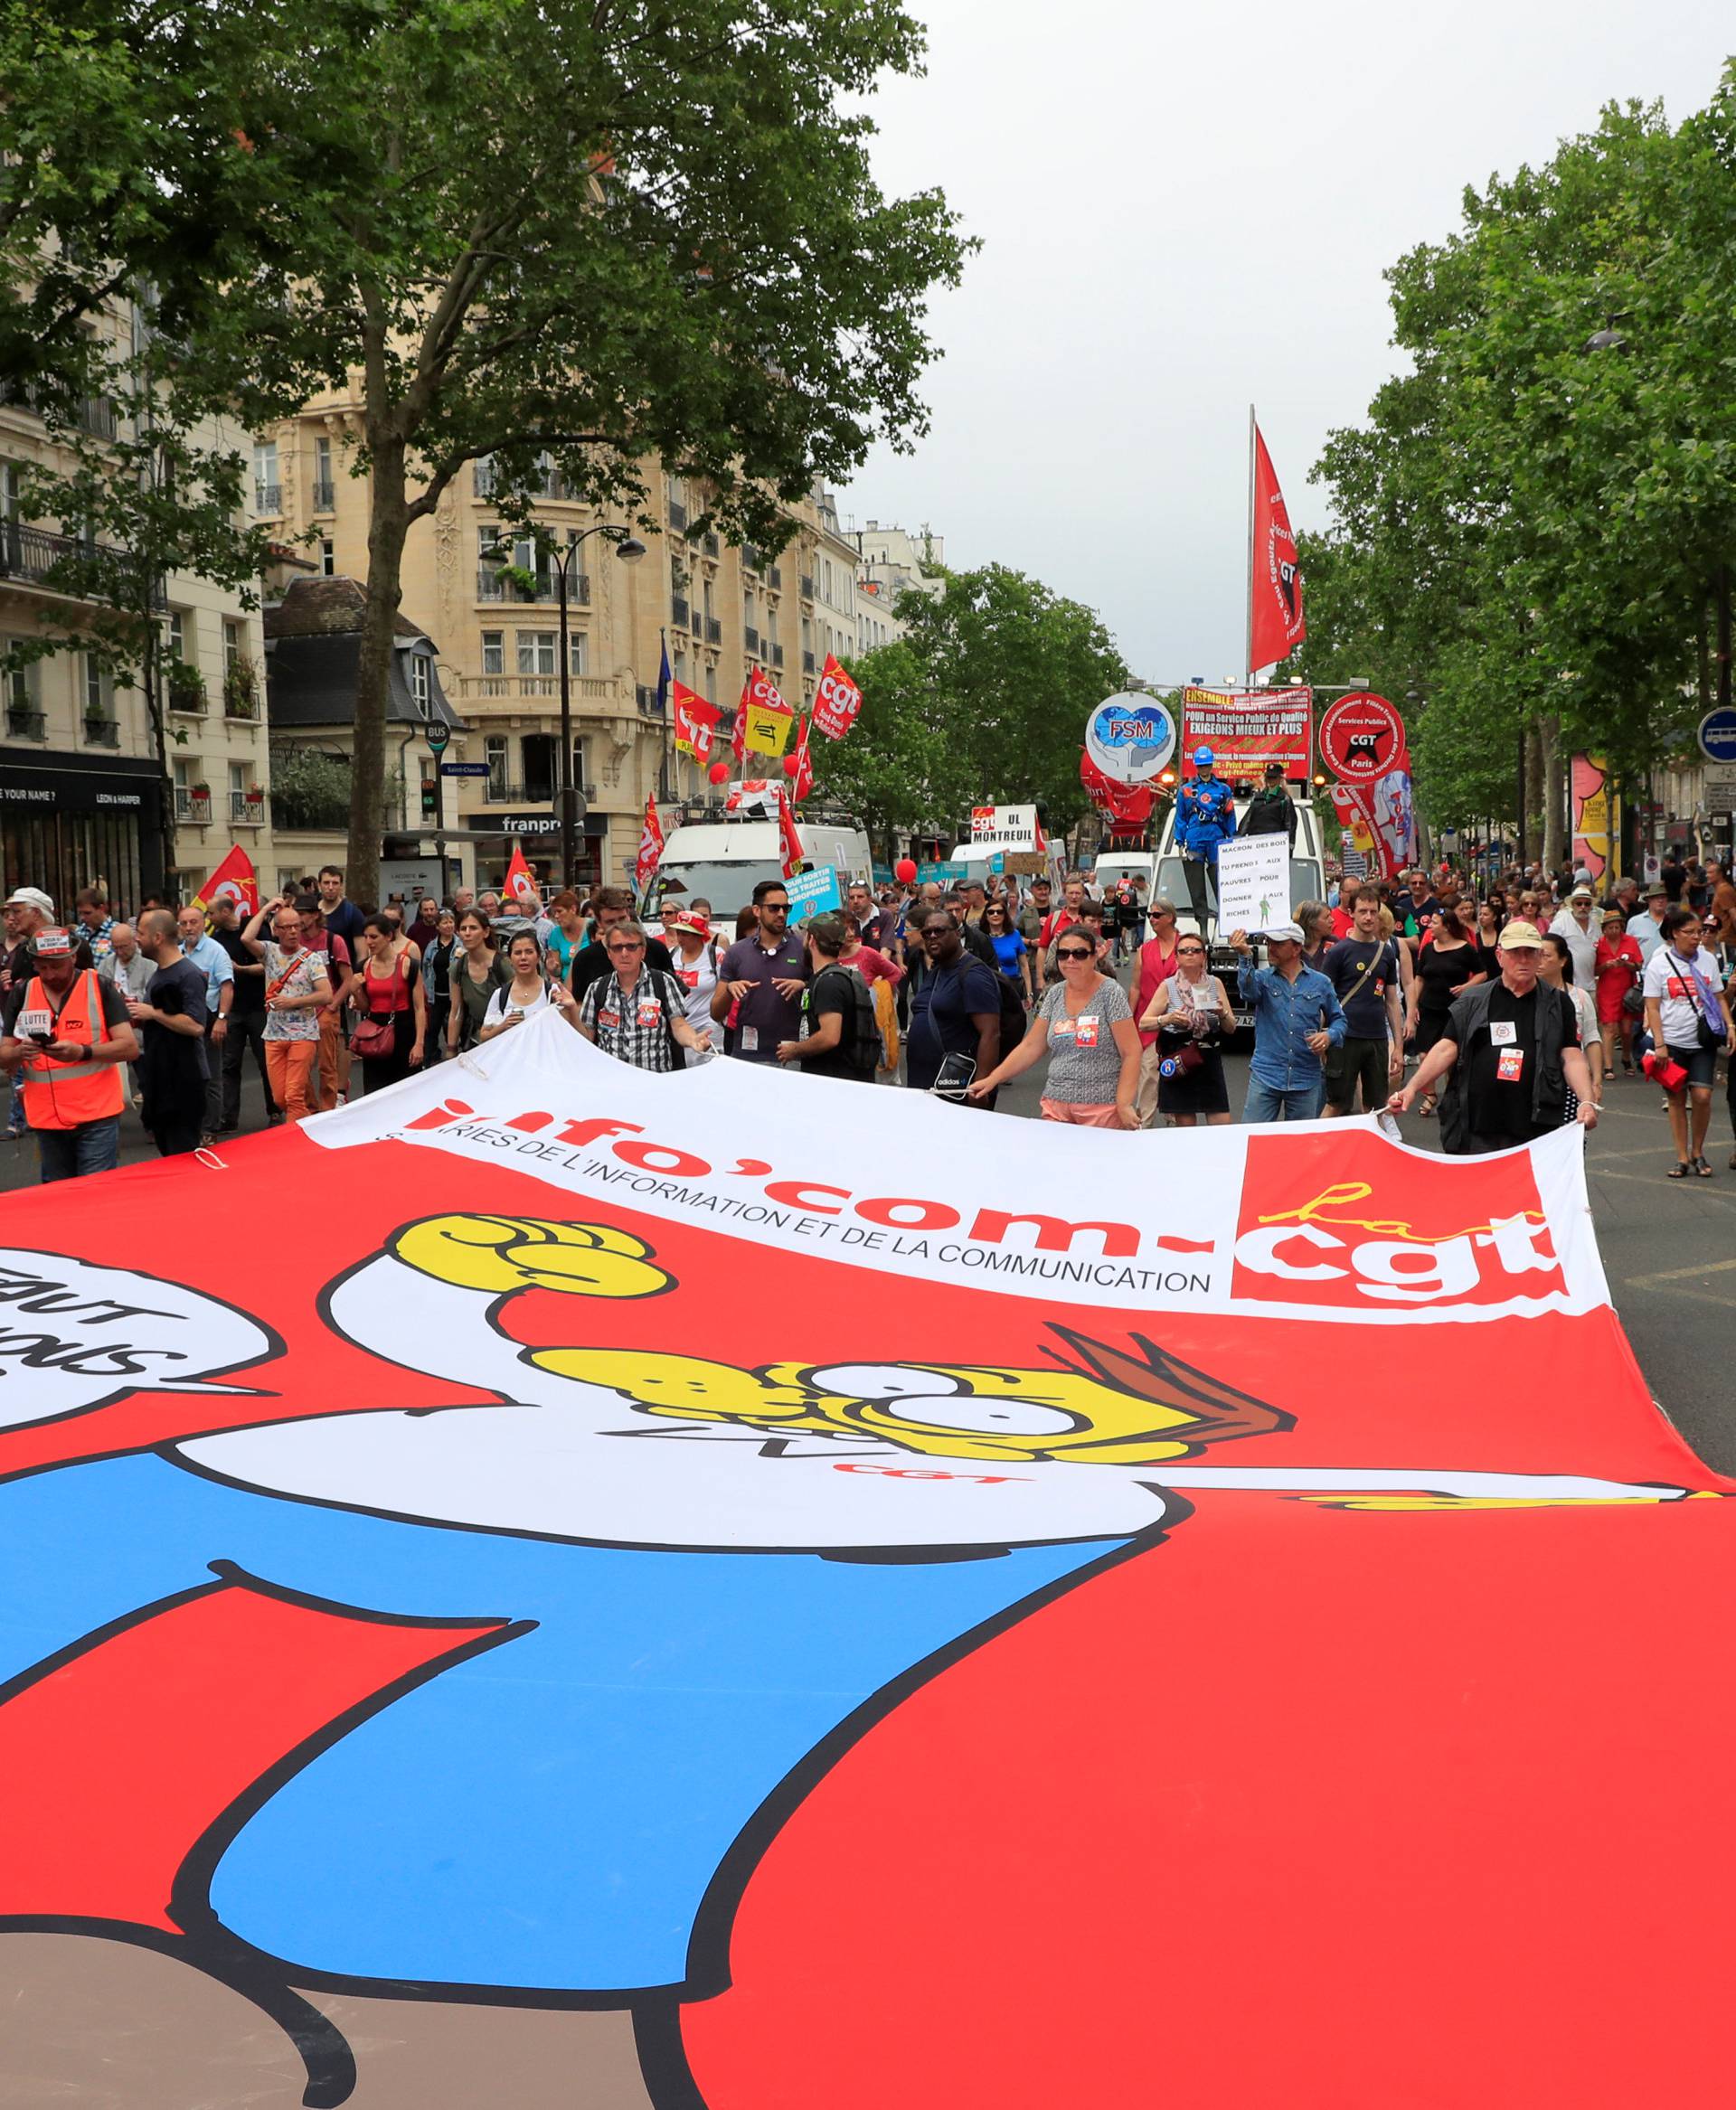 Protesters walk behind a giant banner during a demonstration by French unions and France Insoumise" (France Unbowed) political party to protest against government reforms, in Paris